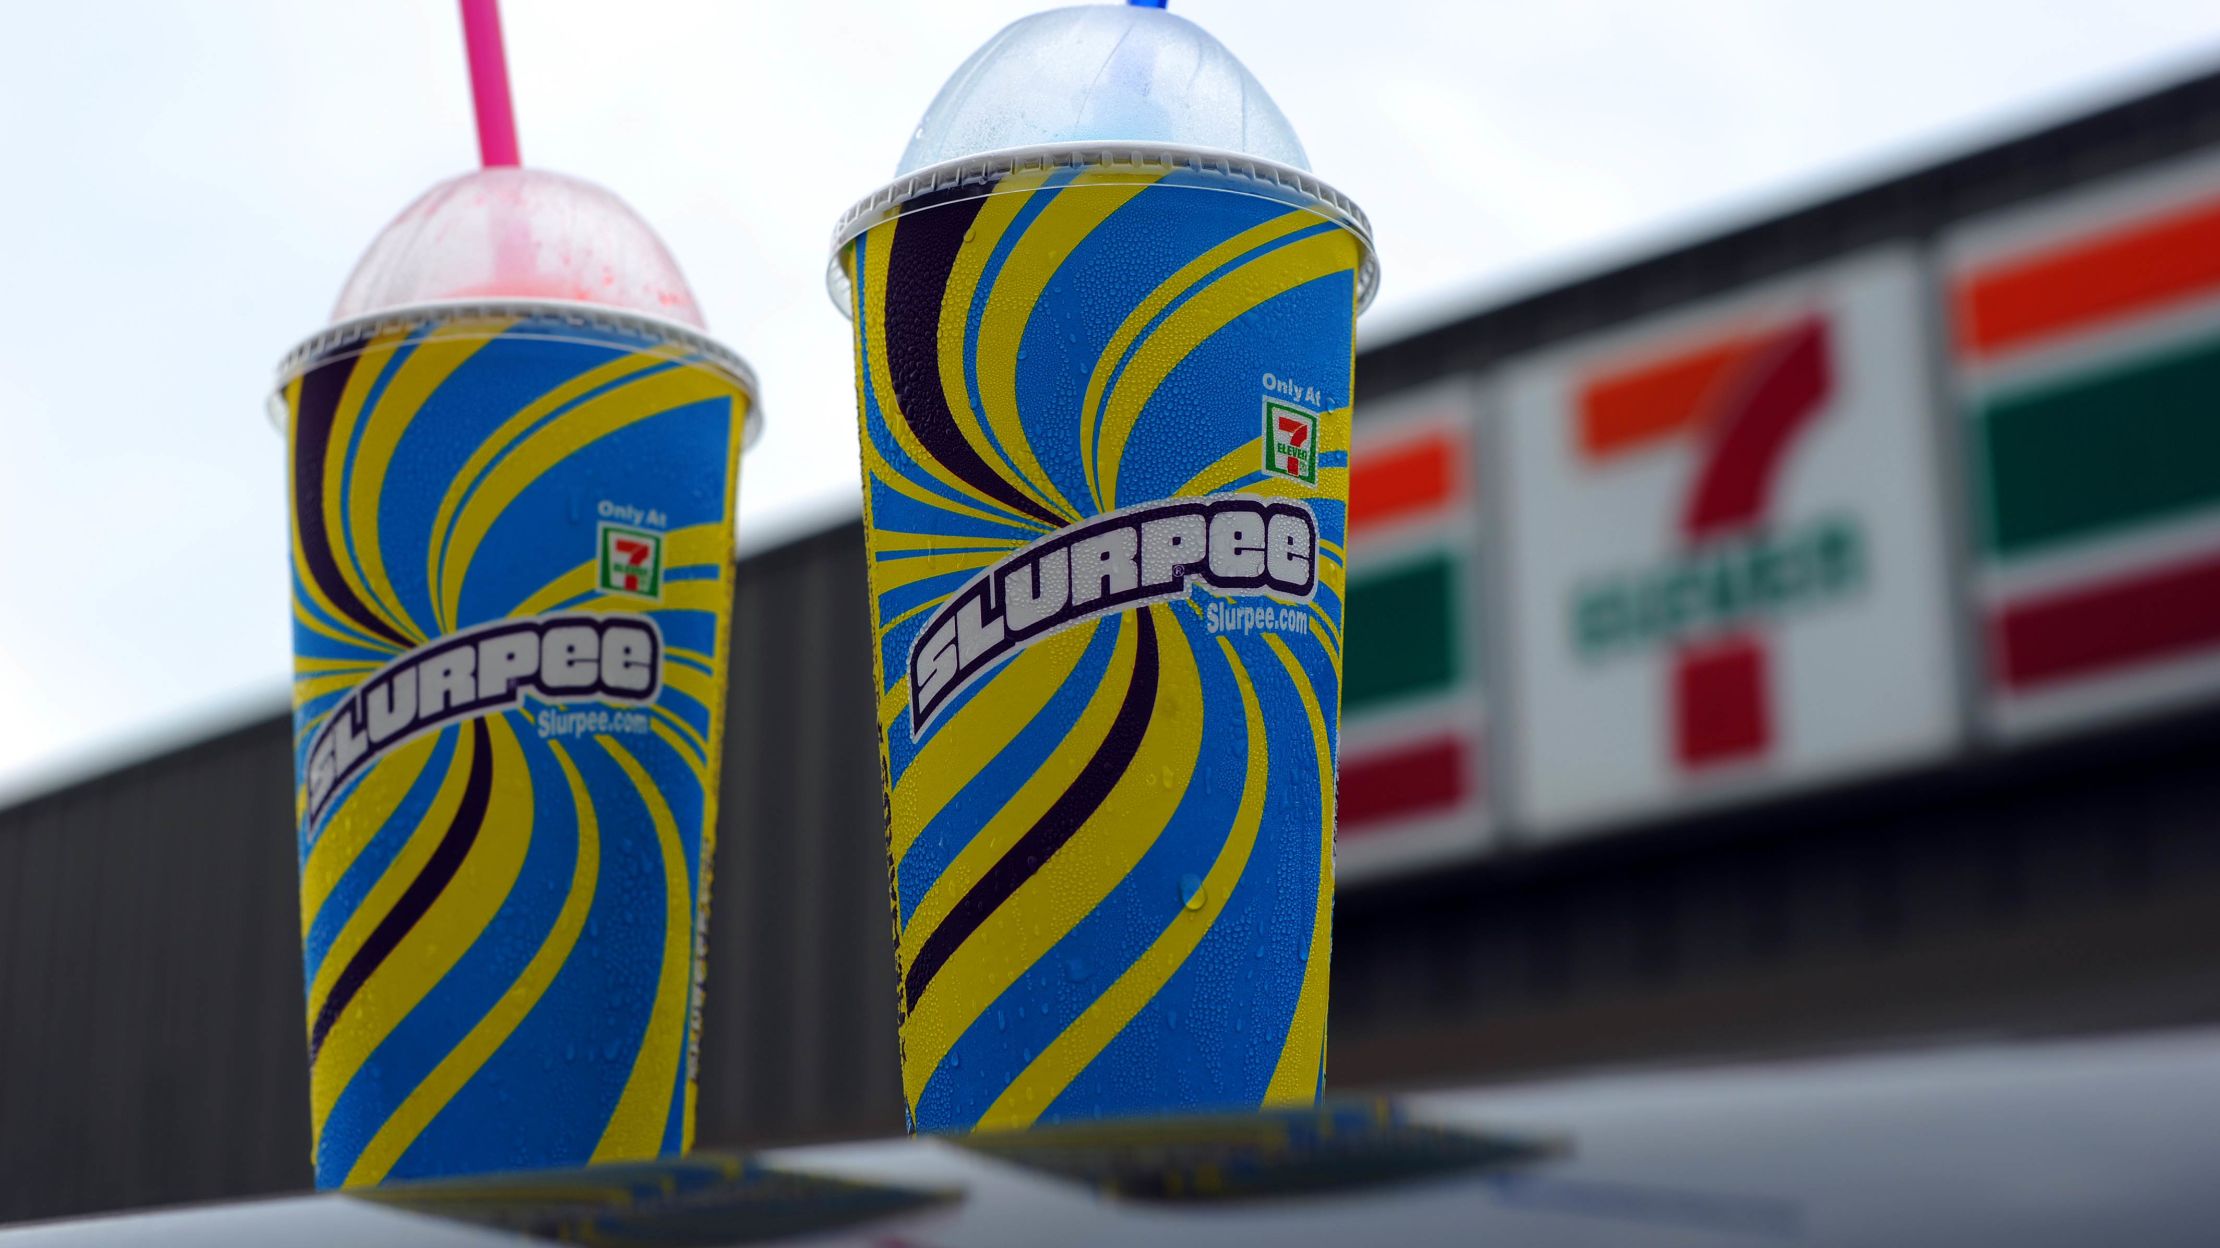 11 Facts About 7 Eleven On 7 11 Mental Floss Images, Photos, Reviews